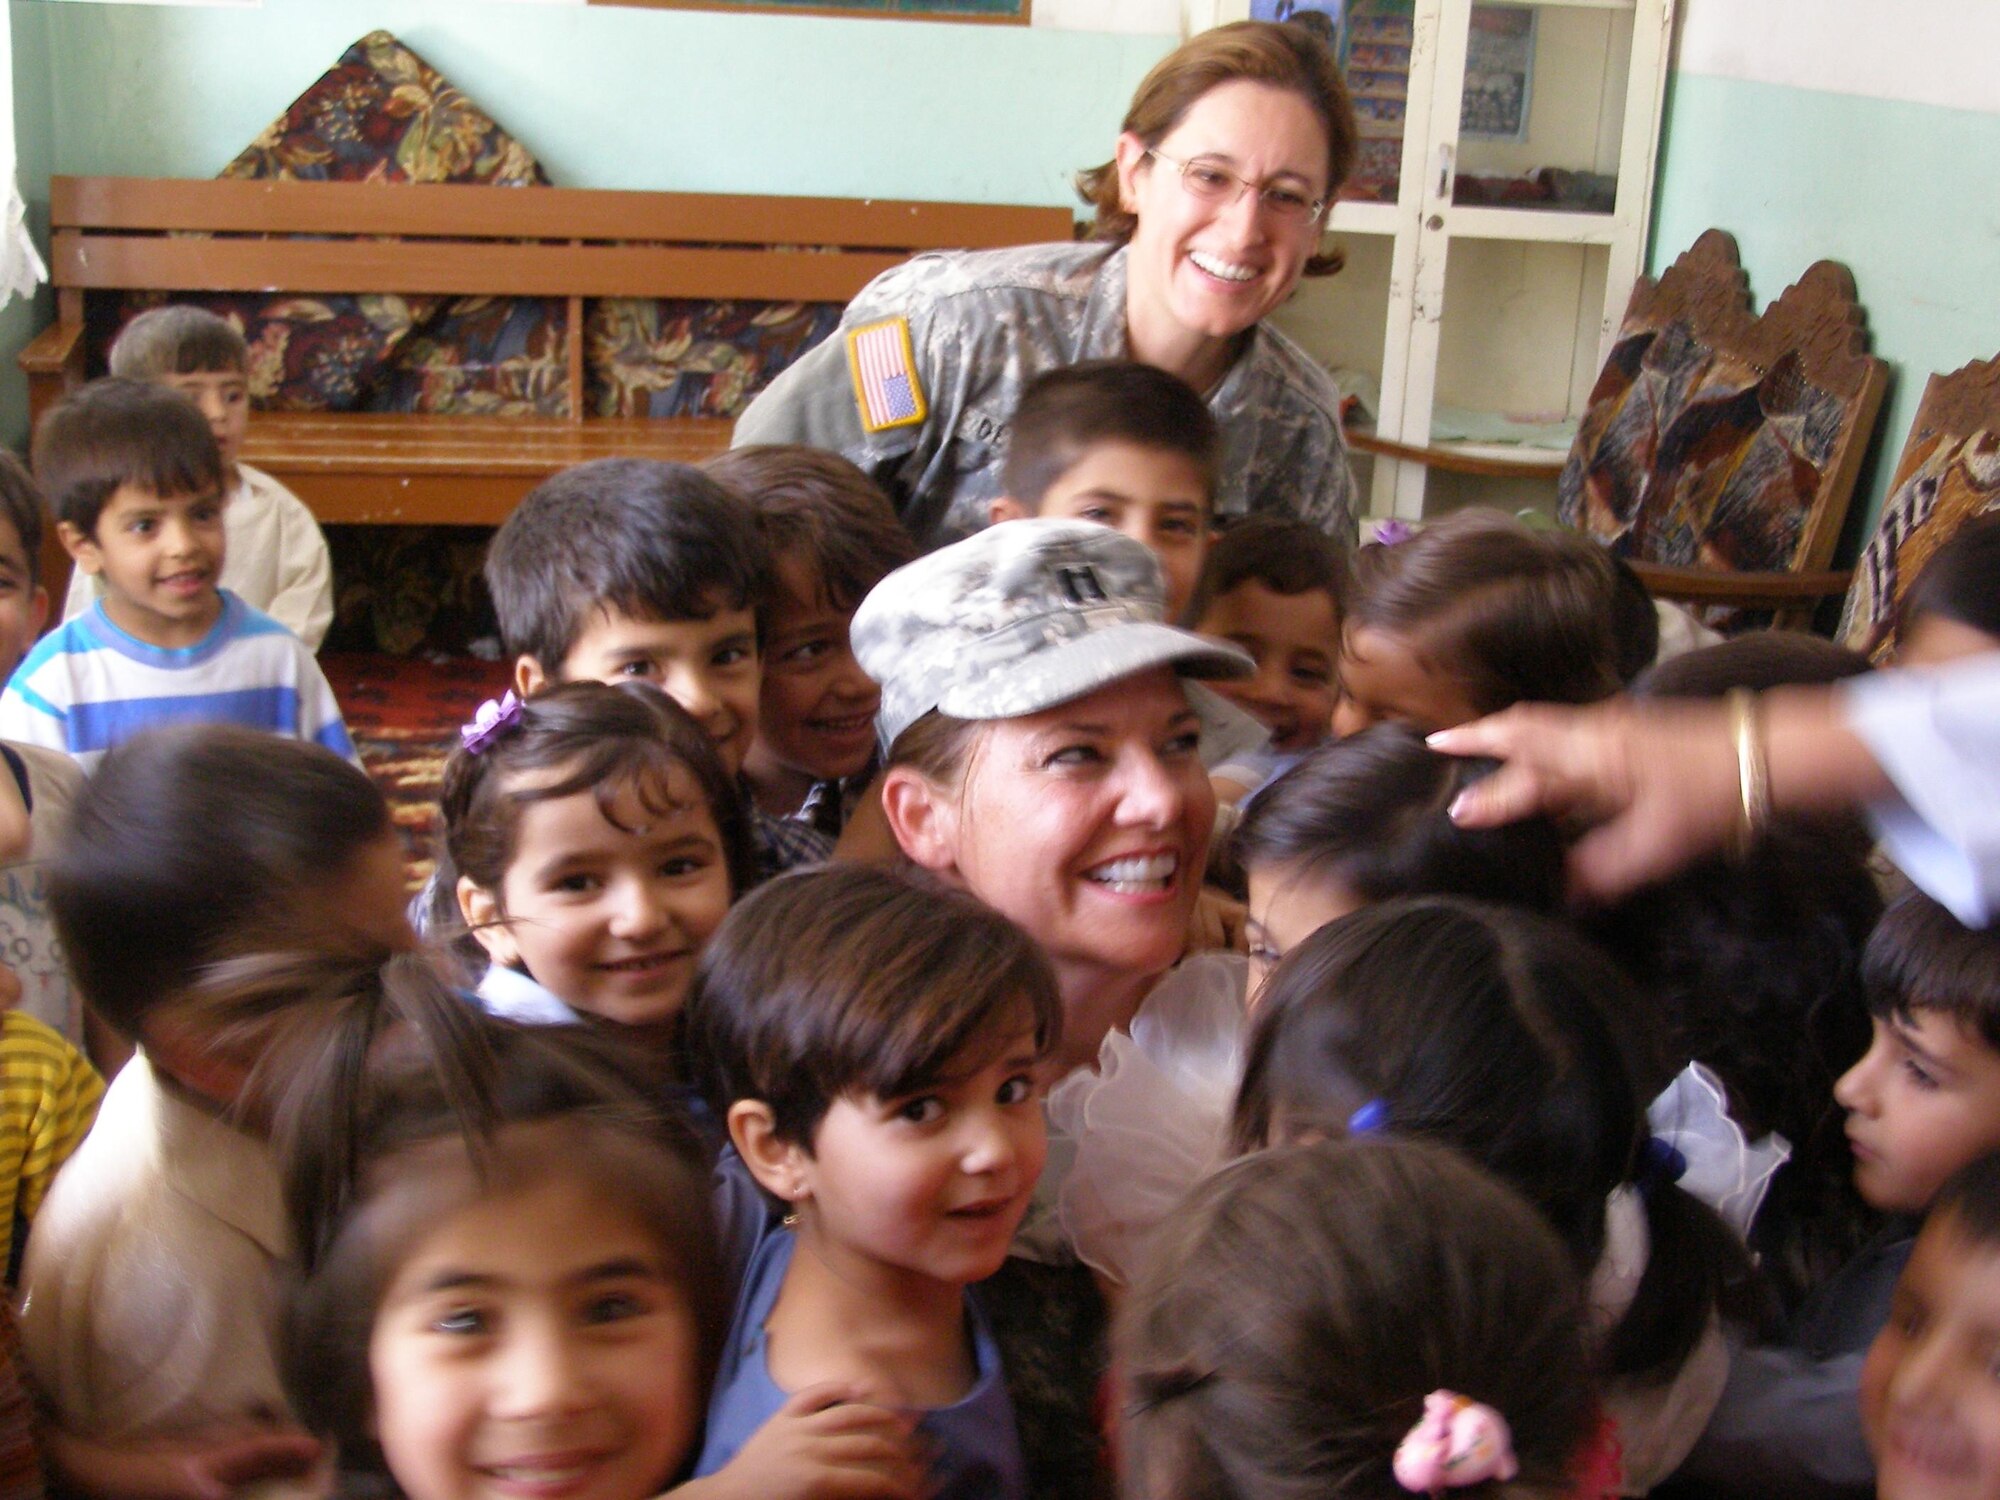 SOUTHWEST ASIA --  Capt. Karen Kramer (center), from the 325th Medical Group, visits an orphanage while deployed here. (U.S. Army photo by Master Sgt. Traci Williams)